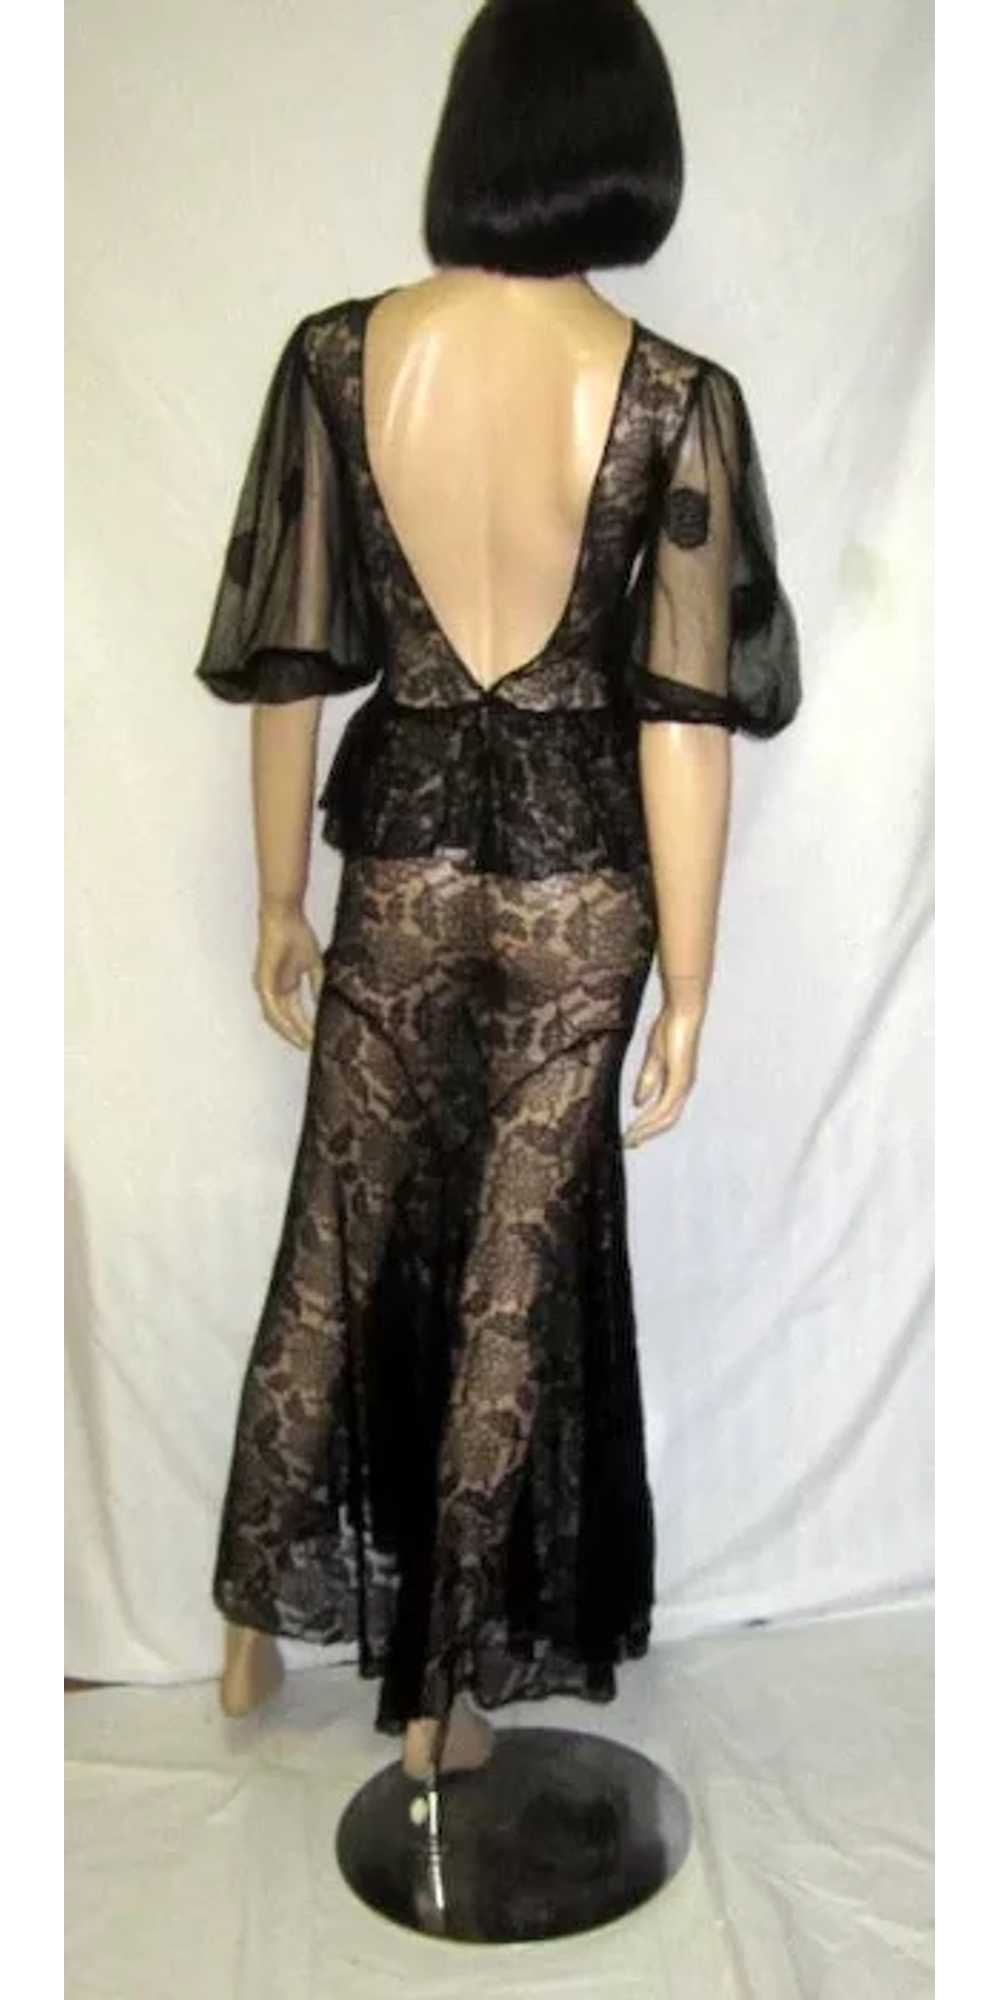 Sensual 1930's Black Lace Evening Gown - image 3